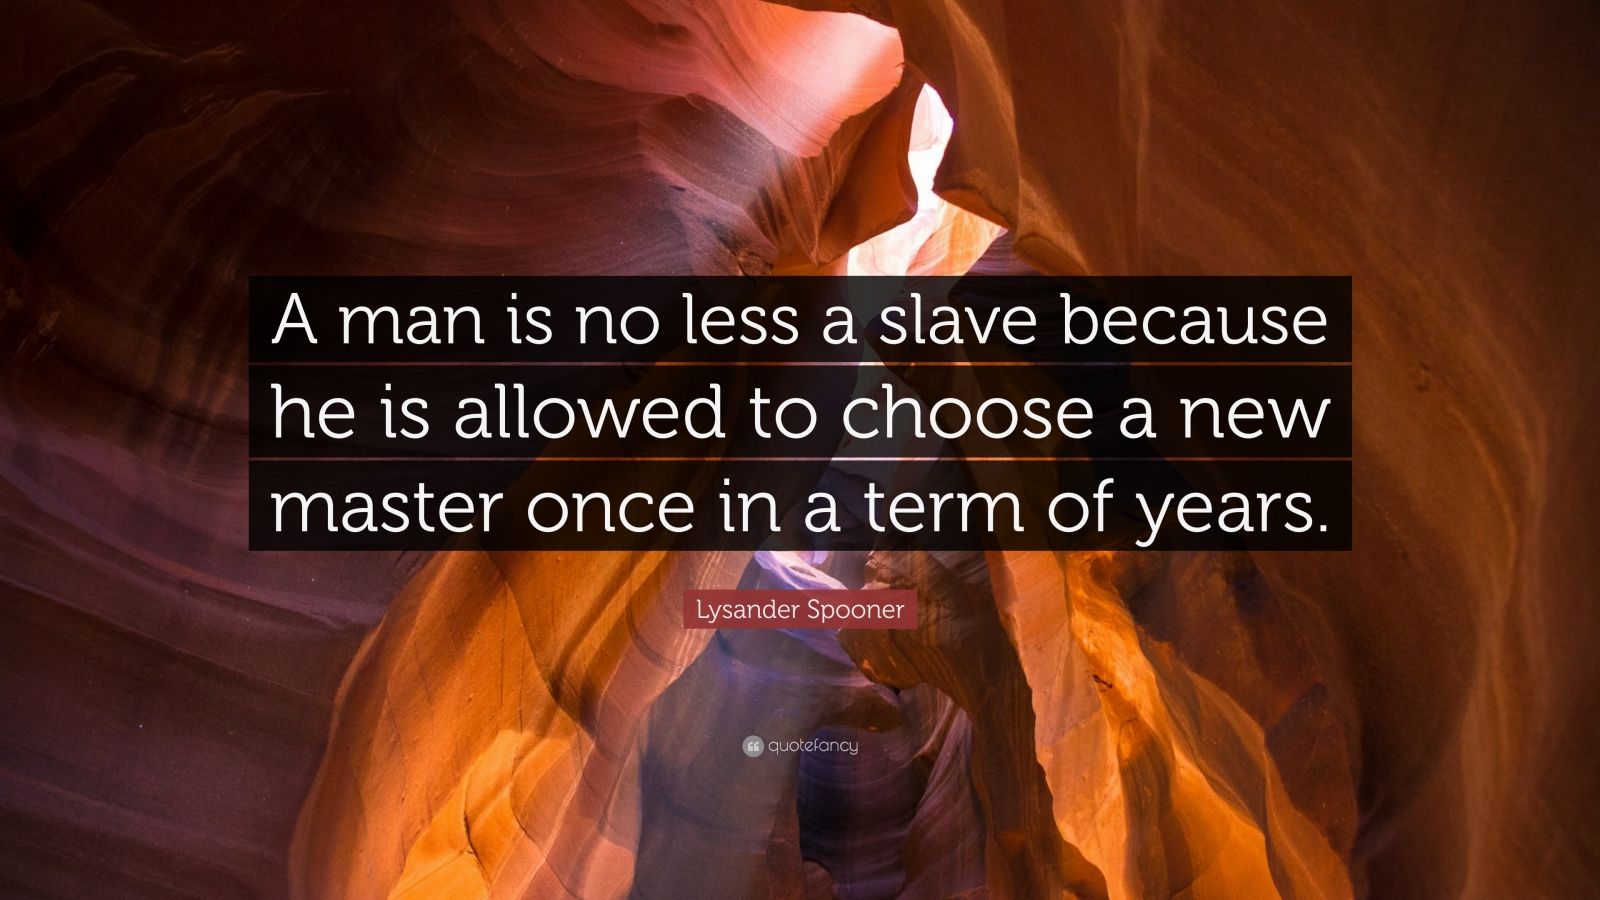 Lysander Spooner Quote: "A man is no less a slave because he is allowed to choose a new master ...